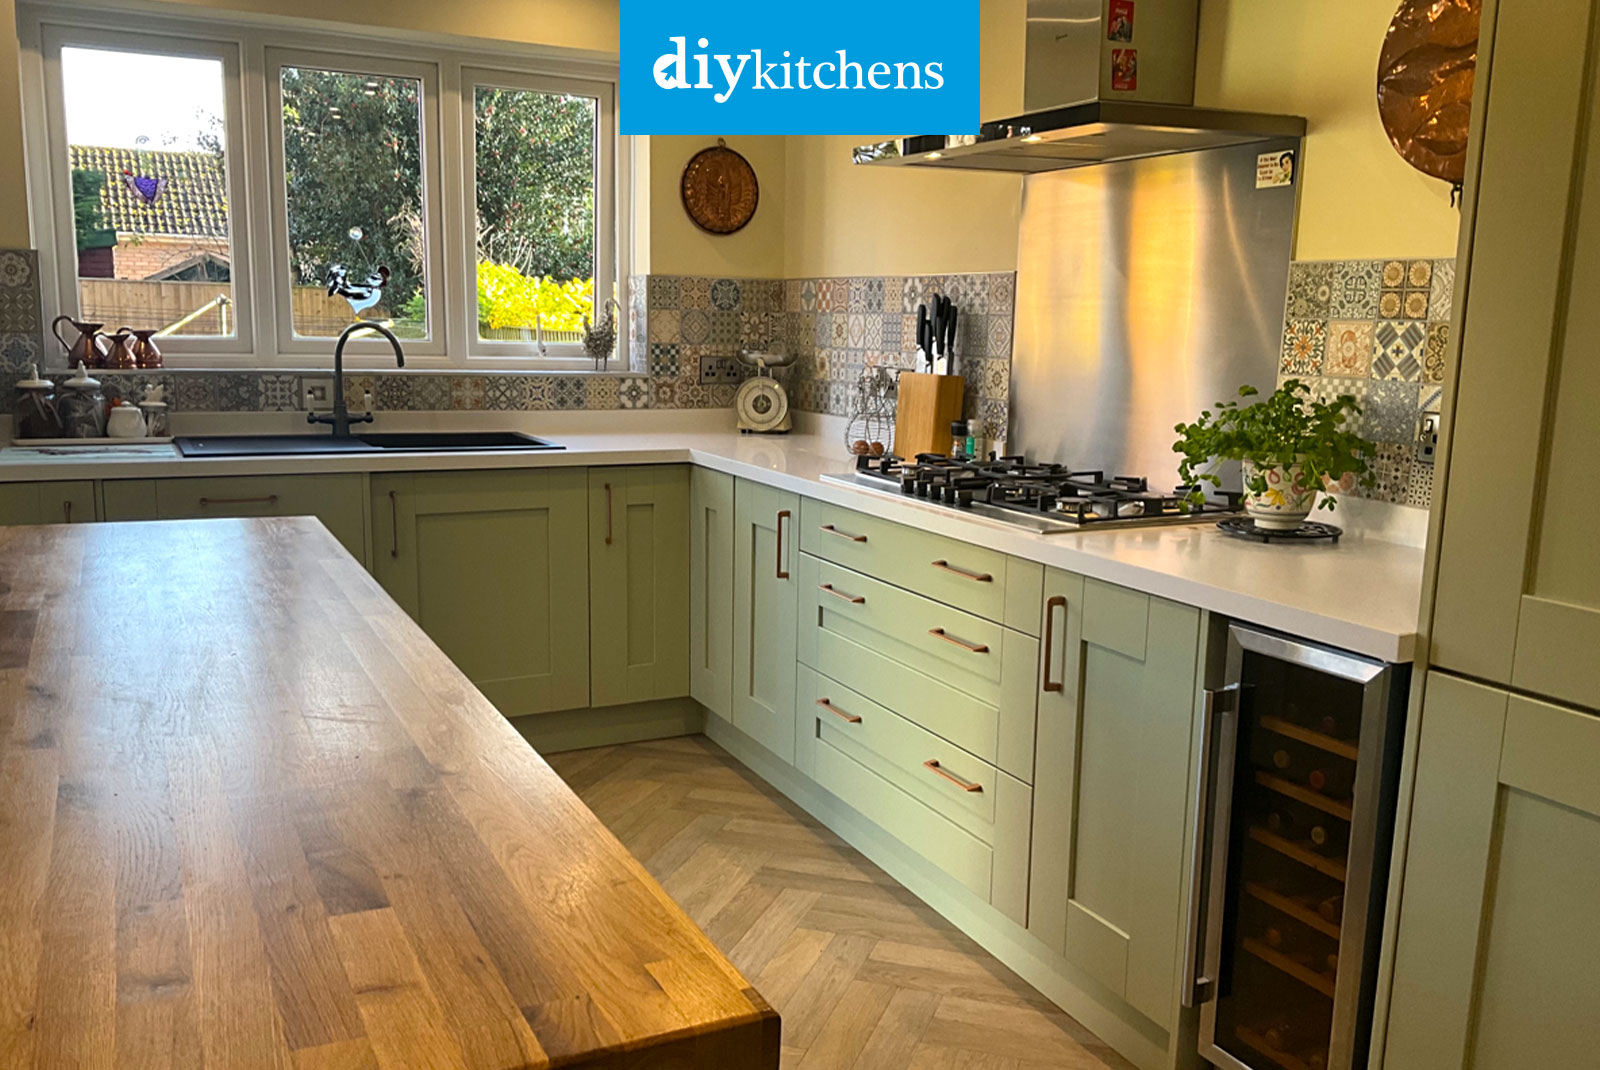 Kitchen Envy - A lovely example of a V groove panel